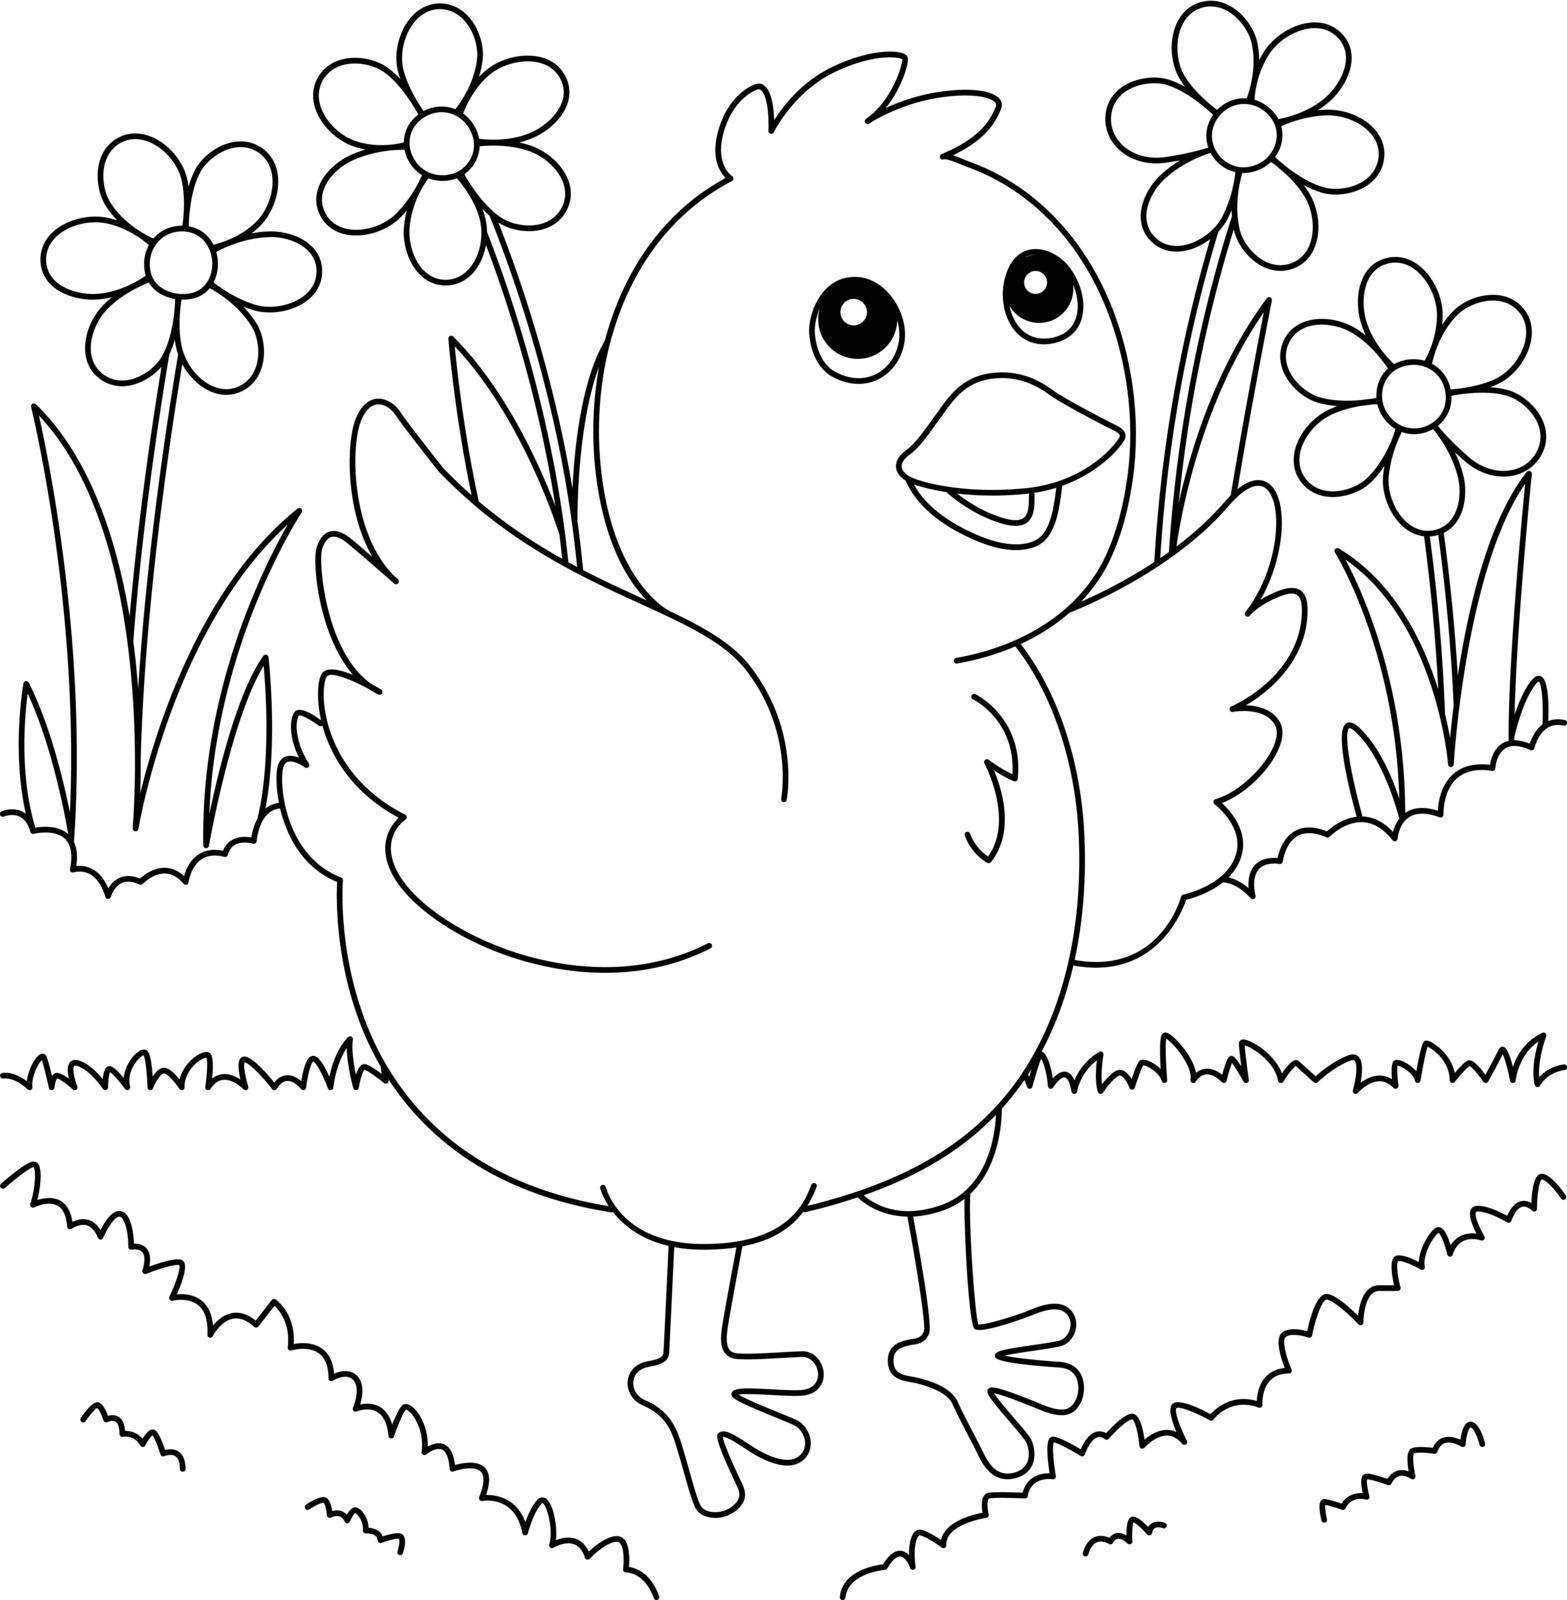 A cute and funny coloring page of a chick farm animal. Provides hours of coloring fun for children. To color, this page is very easy. Suitable for little kids and toddlers.